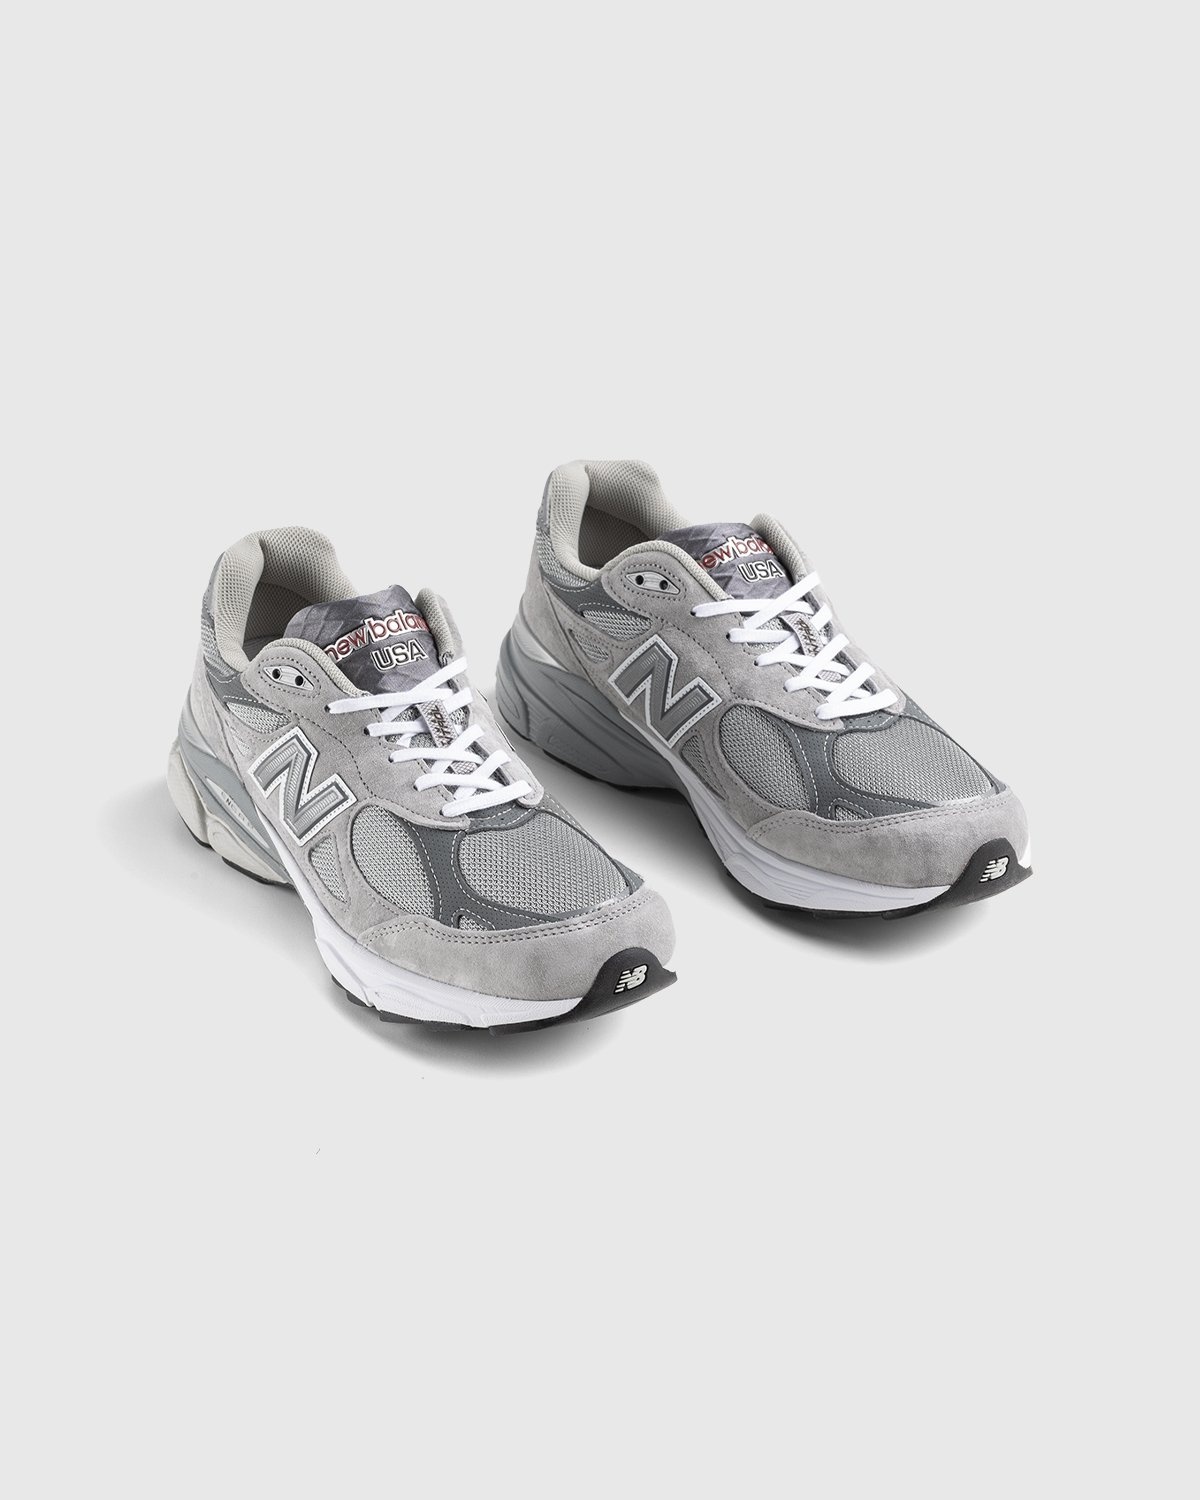 New Balance – M990GY3 Grey - Low Top Sneakers - Grey - Image 3